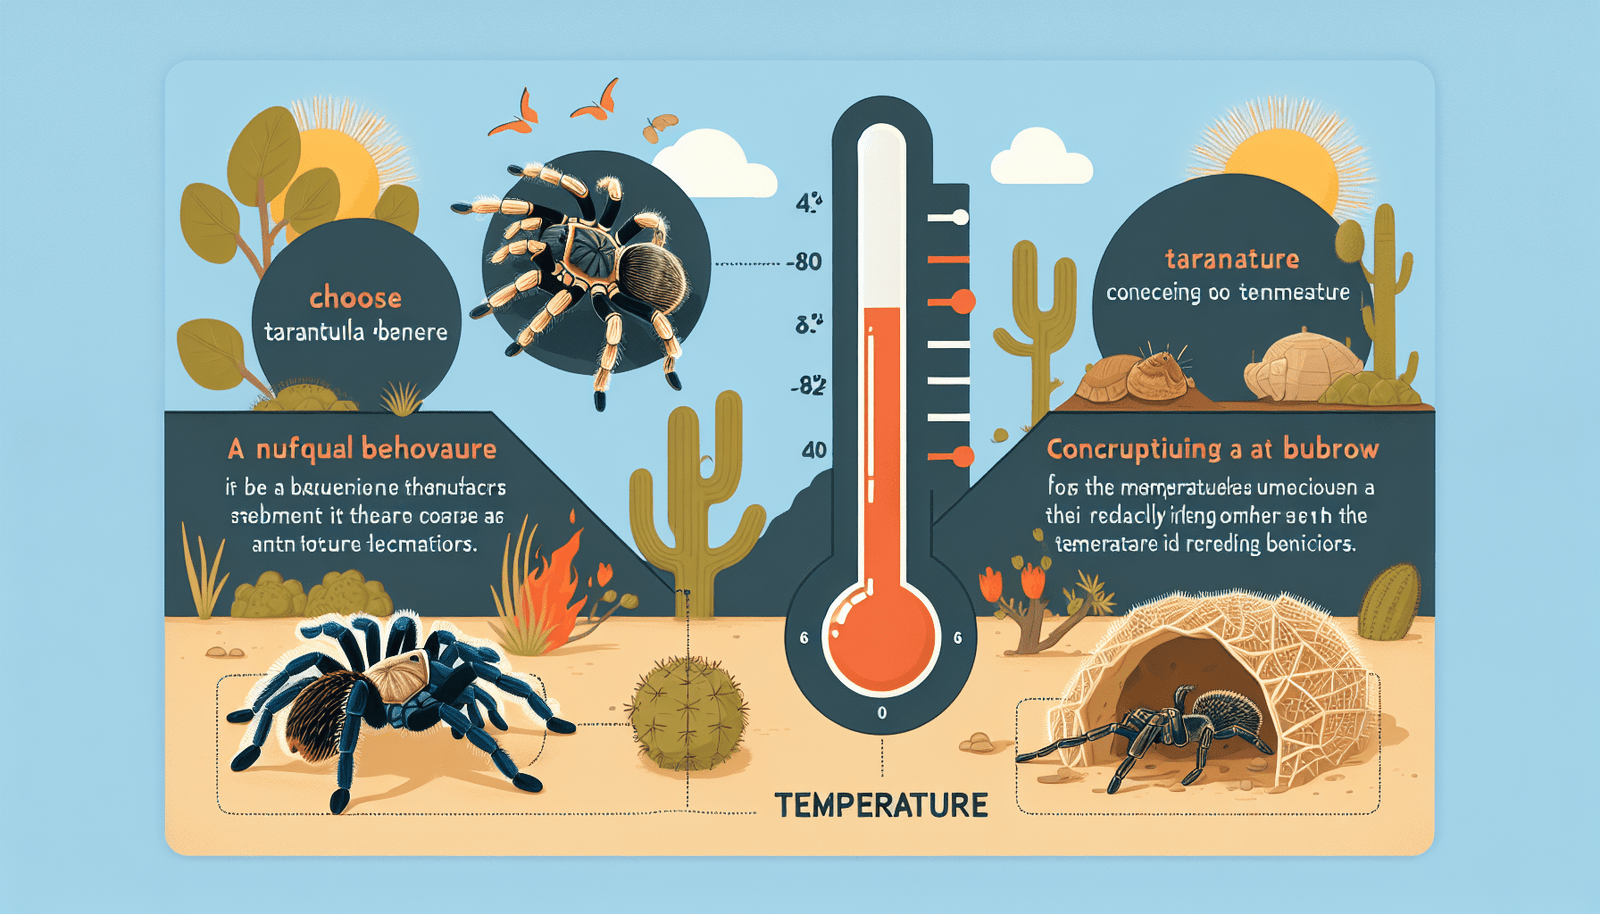 What Is The Role Of Temperature In Influencing Tarantula Breeding Behavior?